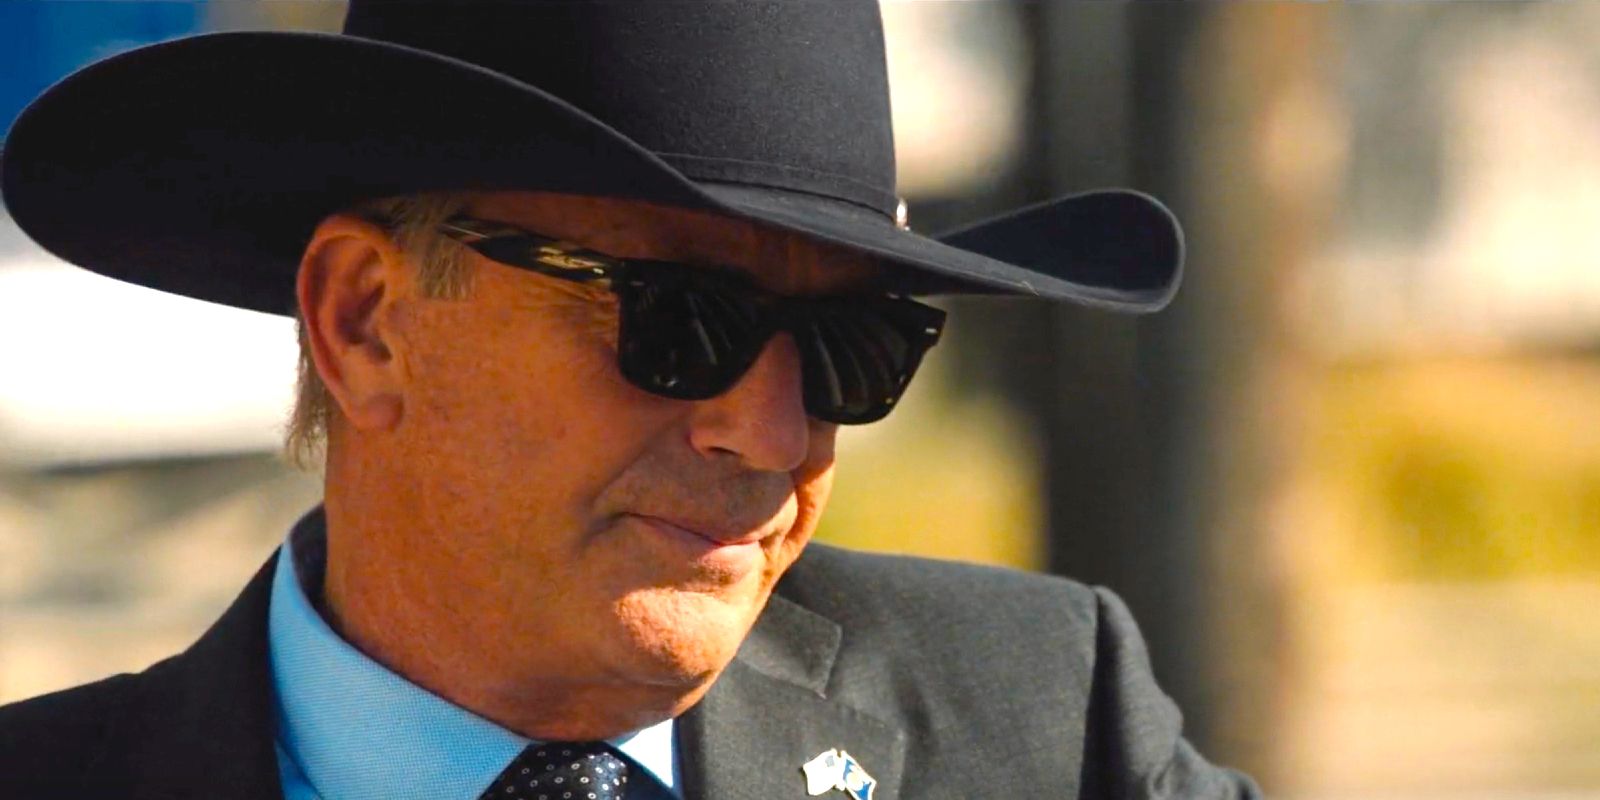 Yellowstone Star Reflects On Kevin Costner’s Exit: “You Gotta Do What You Love”